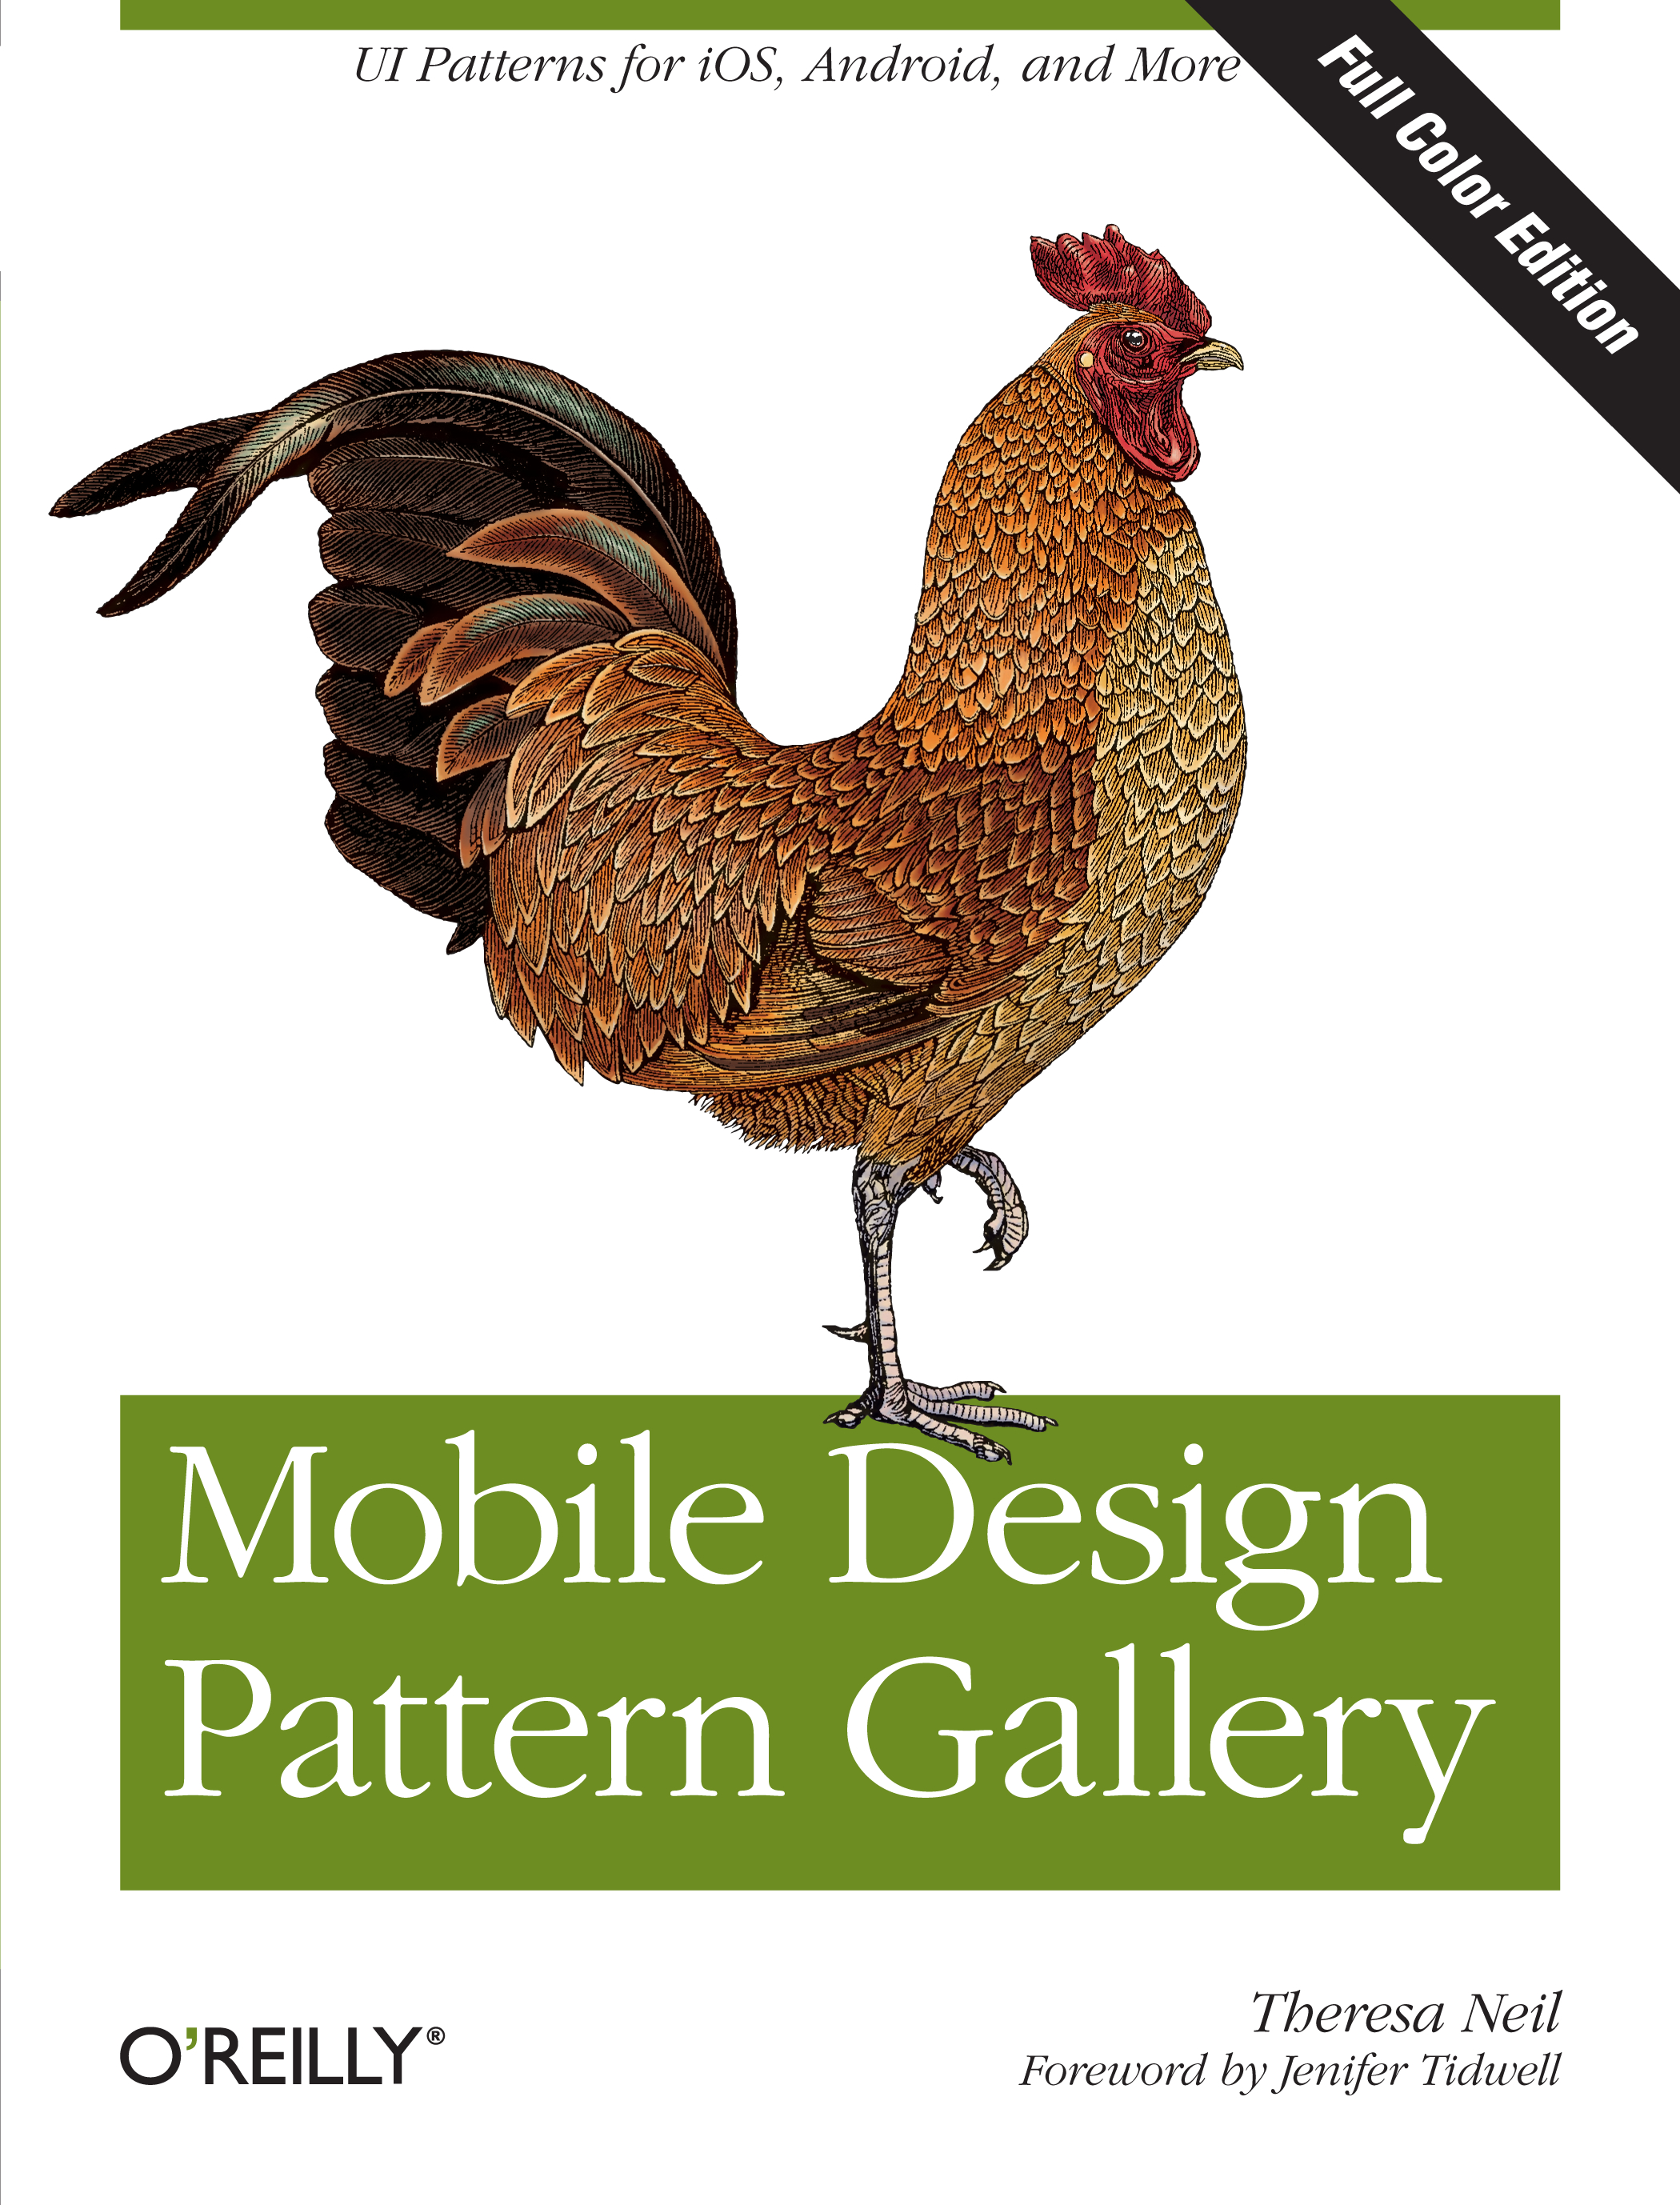 Oreilly Mobile Design Pattern Gallery